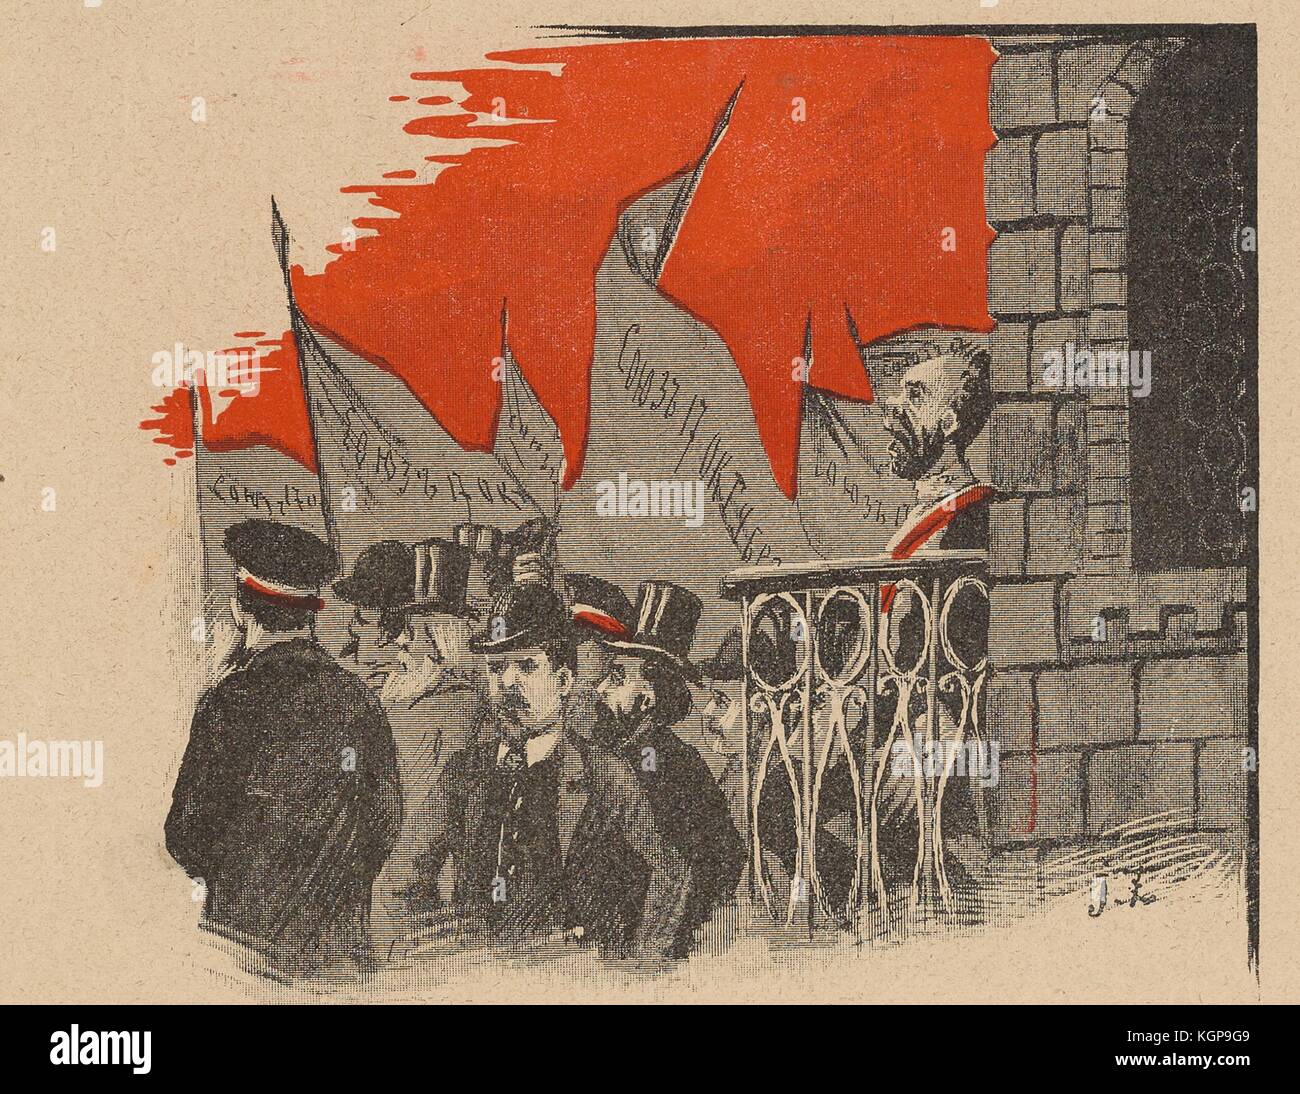 Cartoon from the Russian satirical journal Ovod (Gadfly) showing Tsar Nicholas II staring at something in amazement while a crowd of people around him look away from him; The people in the crowd are holding flags with text that reads 'Union October 17', likely referring to the October Manifesto, a document that granted basic civil rights, which was issued on October 17, 1905, 1906. () Stock Photo